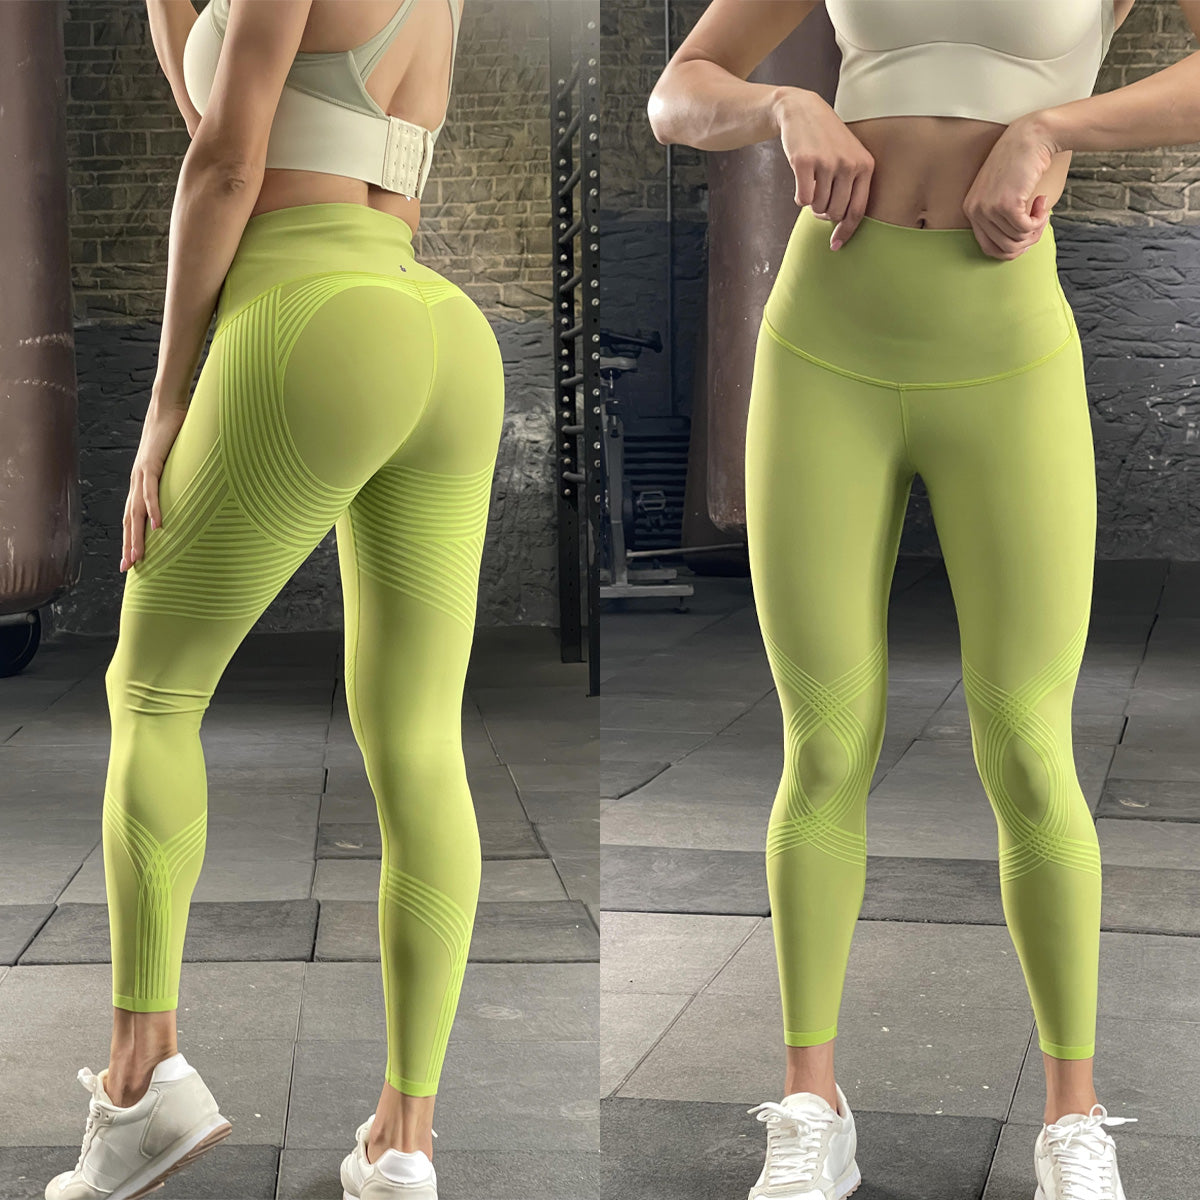 These Are The BEST Compression Leggings I Believe Every Active